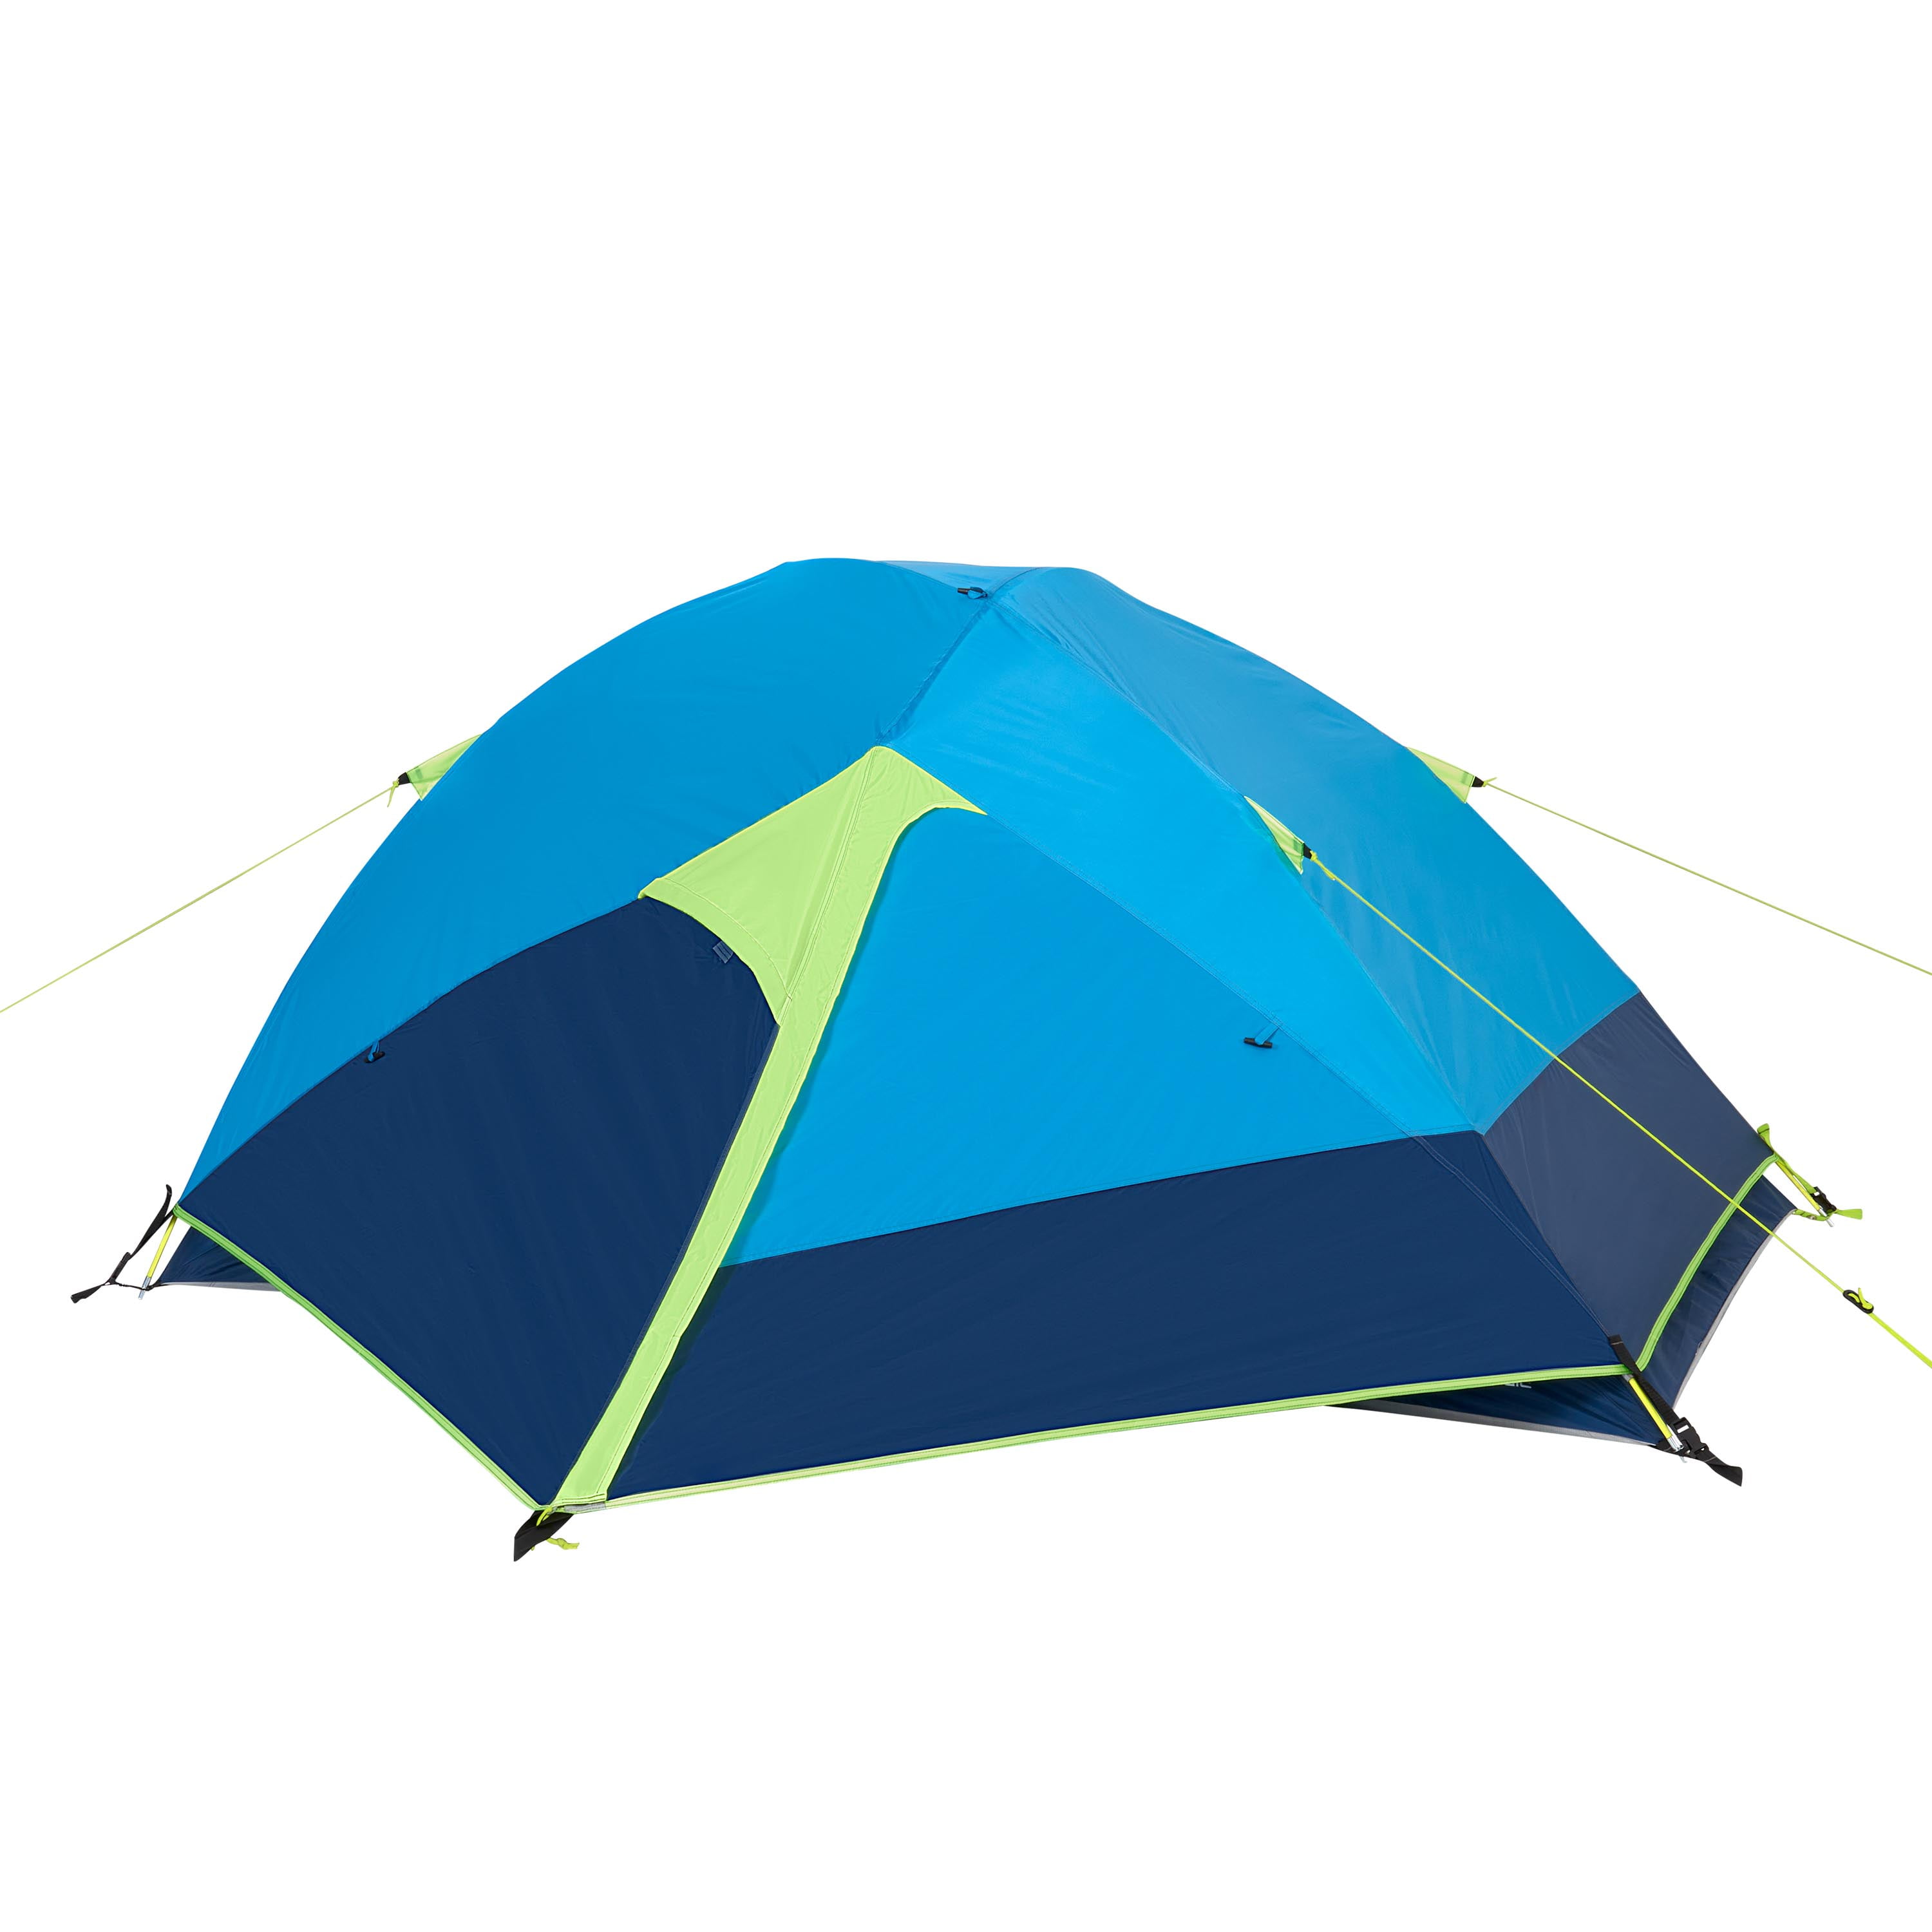 Ozark Trail 2-Person Backpacking Tent, Made with Recycled Polyester Fabric